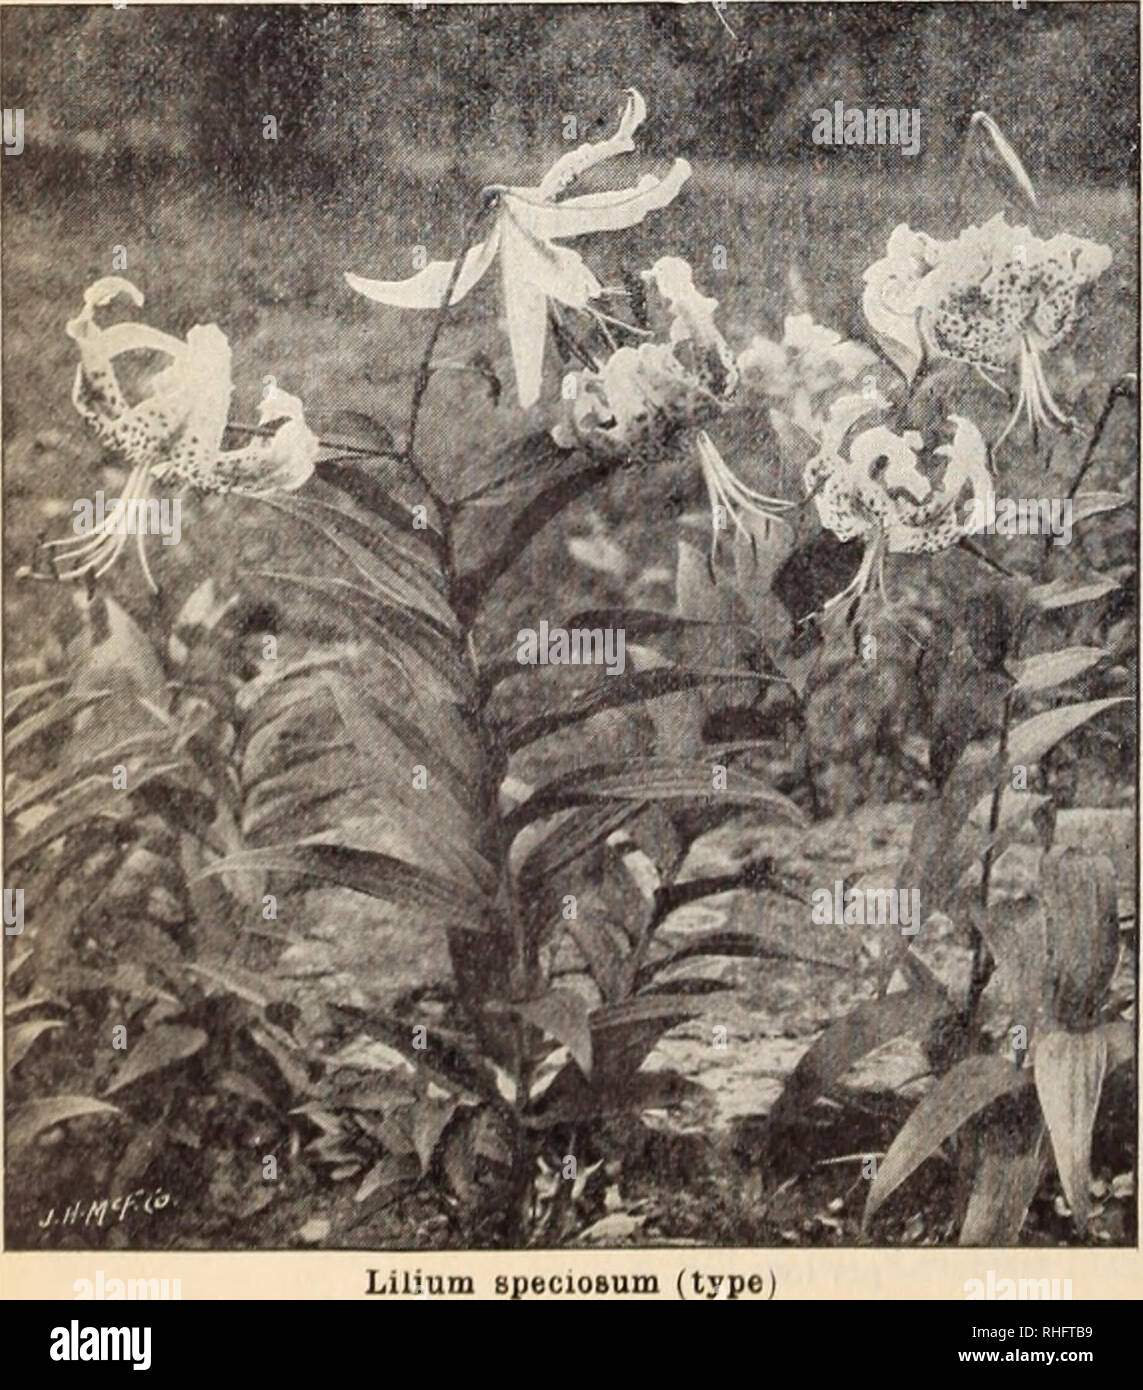 . Boddington's quality bulbs, seeds and plants / Arthur T. Boddington.. Nursery Catalogue. Lilium auratum RARE LILIUM AURATUMS LILIUM AURATUM MACRANTHUM. Another grand type of the ()1(leii 1 )an(leil l.il bulbs, 50 cts. each, I4 per doz., #30 per 100.. Lilium BpecioBum (type LILIUM AURATUM PICTUM. A very choice Each Doz. 100 type of Lilium auraluiii: pure white, with red and yellow bands tliroUL'h each petal. Large bulbs.... $0 30 $3 00 $20 00 LILIUM AURATUM PLATYPHYLLUM. A very strong and vigorous type of L. atiraturn. Flowers of immense size, pure ivory-white, with a deep golden band throug Stock Photo